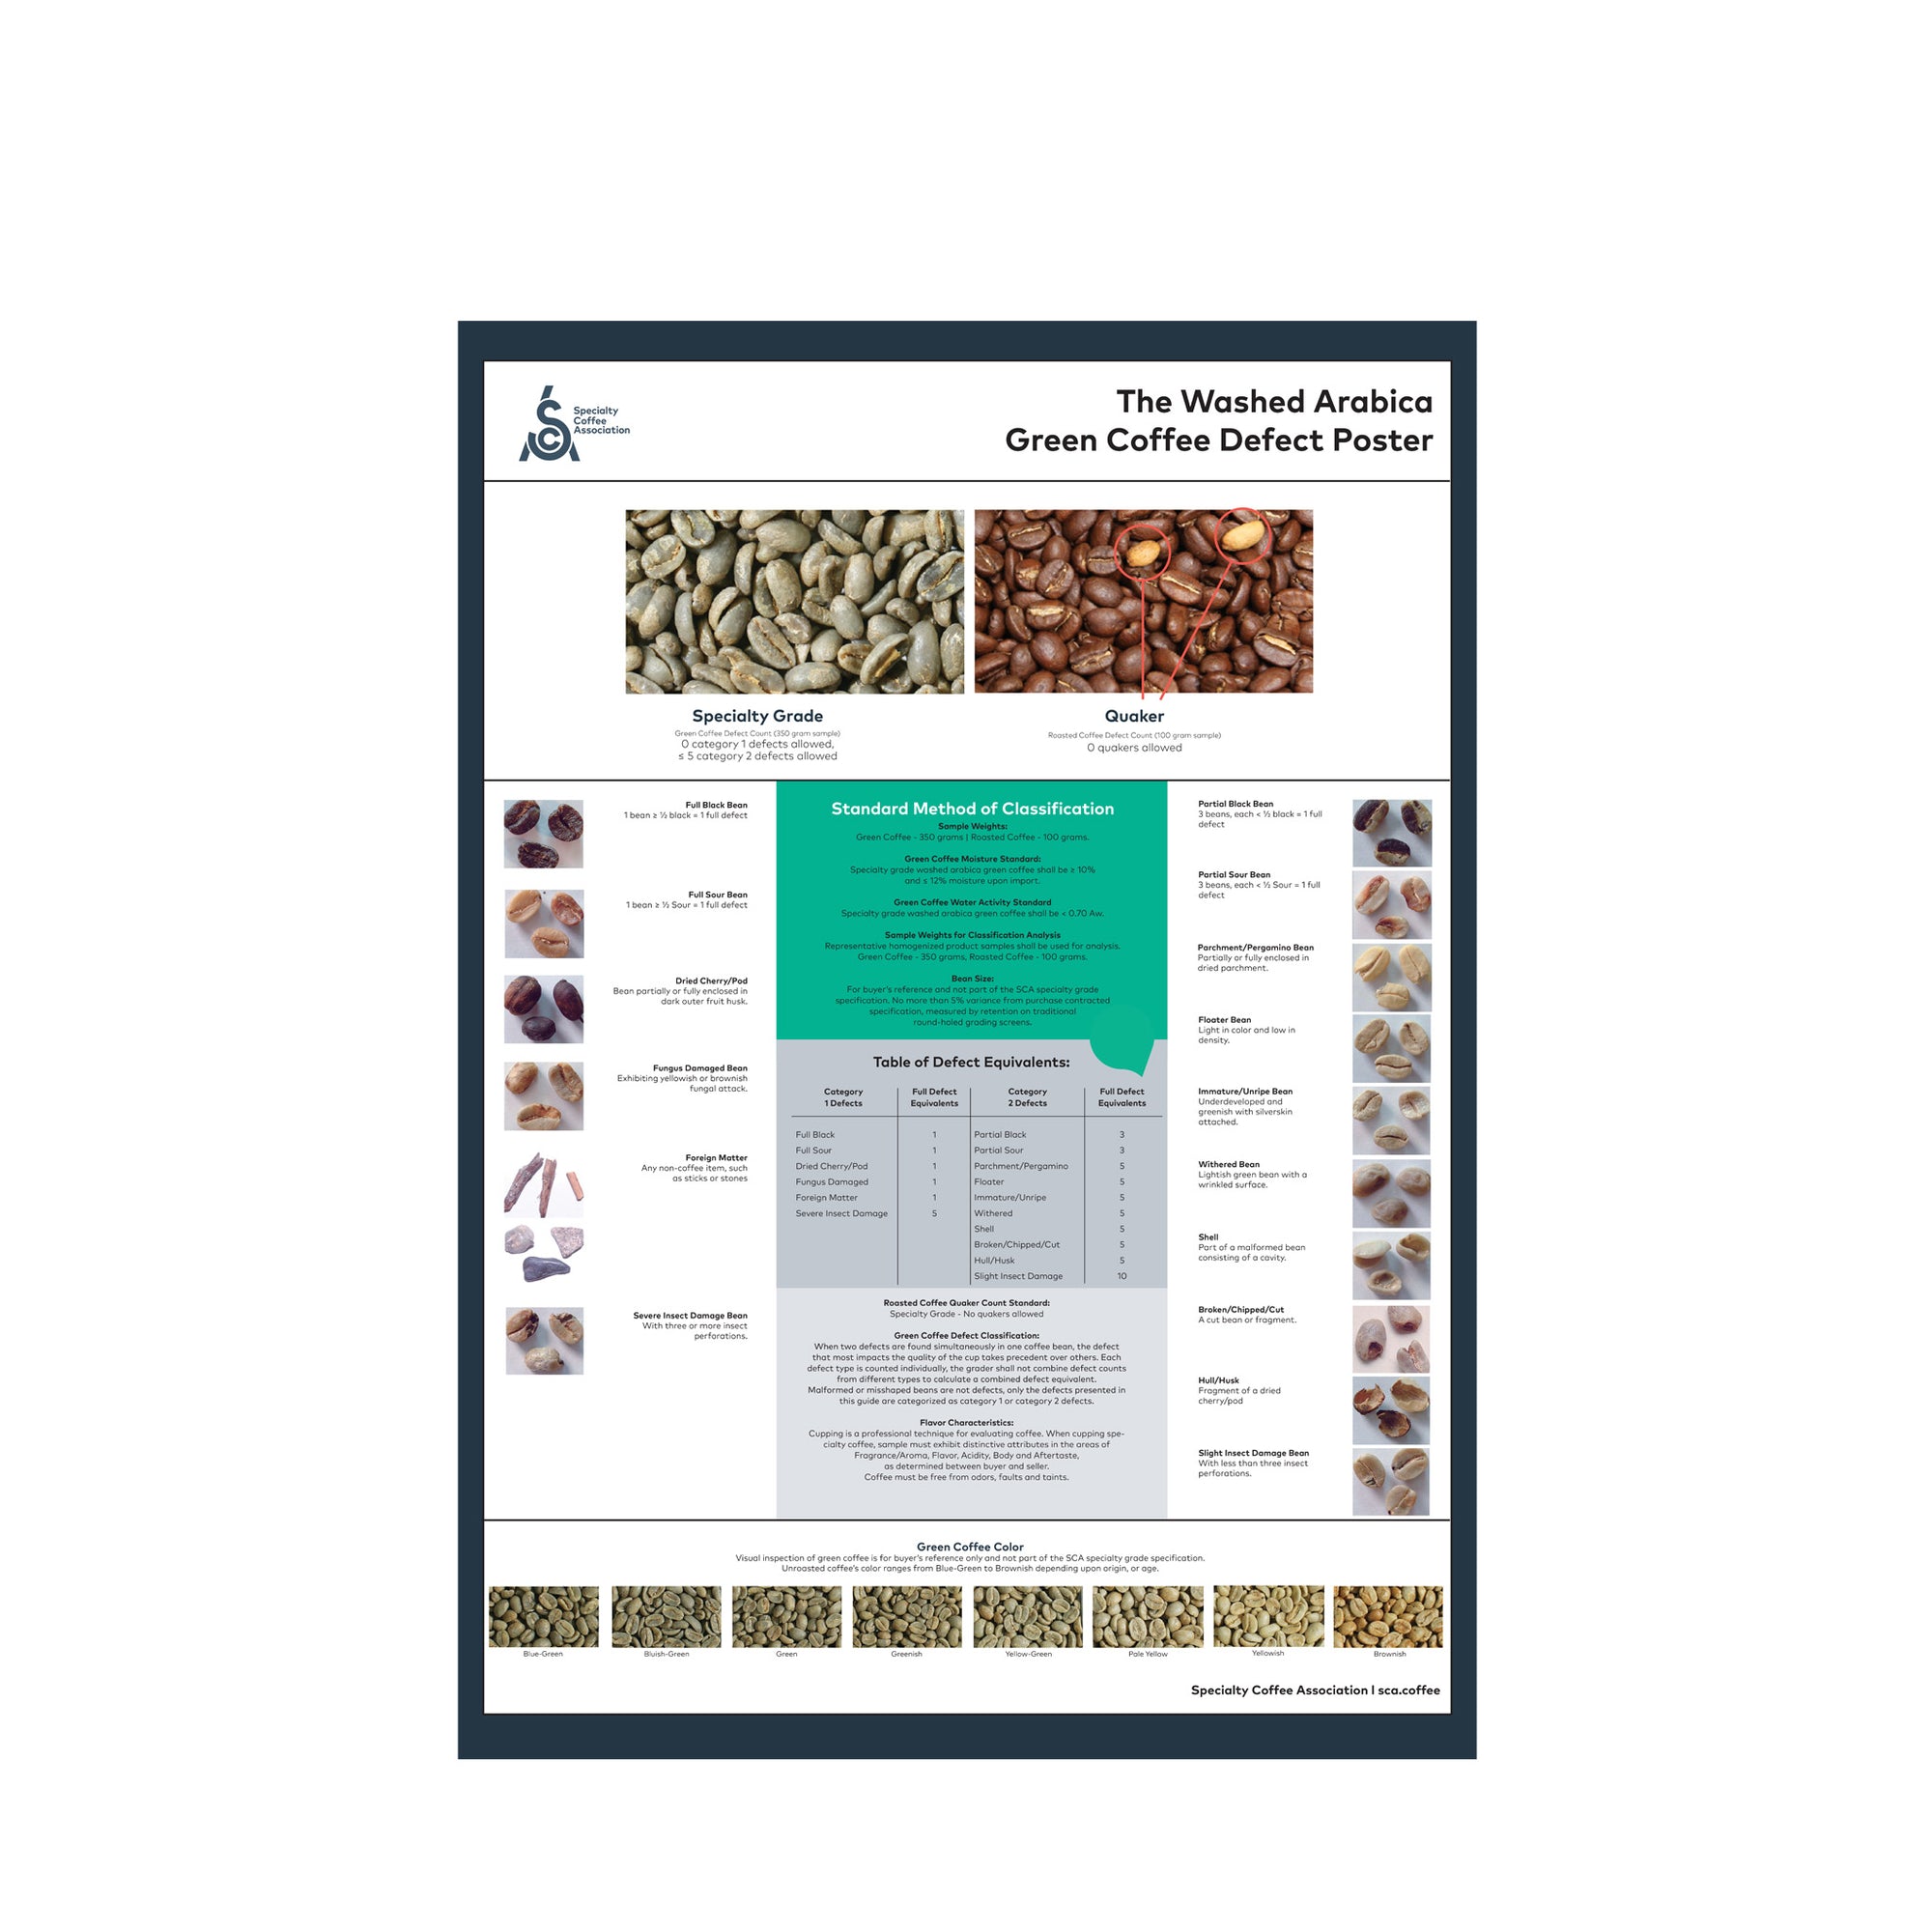 A resource to show your employees or your customers the image samples of the defects that might be present in green coffee and how they affect the grade of coffee.